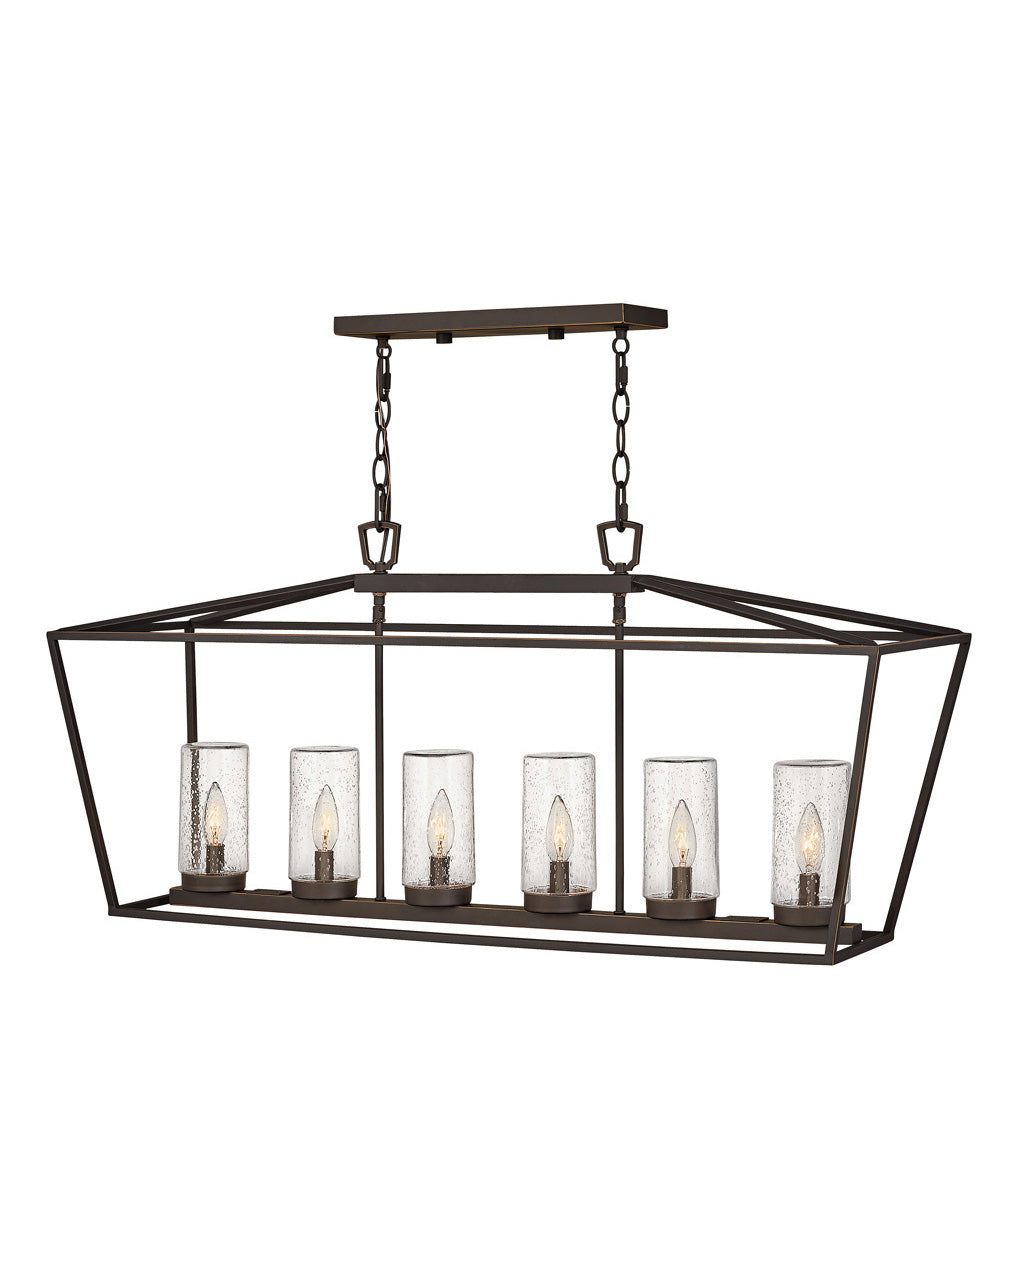 OUTDOOR ALFORD PLACE Light Linear Outdoor l Wall Hinkley Oil Rubbed Bronze 12.0x40.0x18.75 